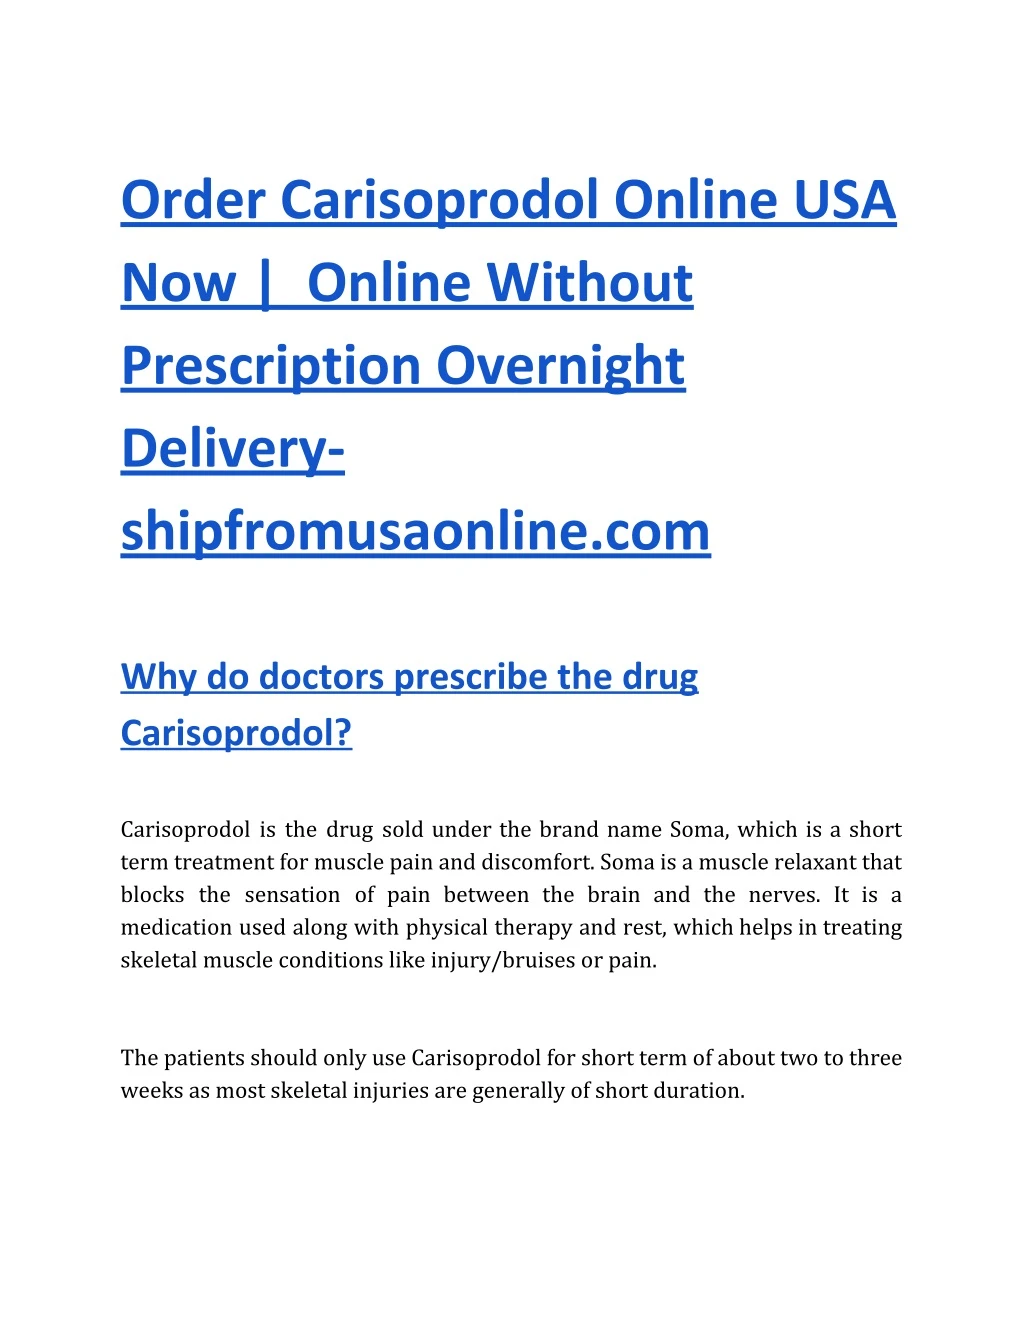 order carisoprodol online usa now online without